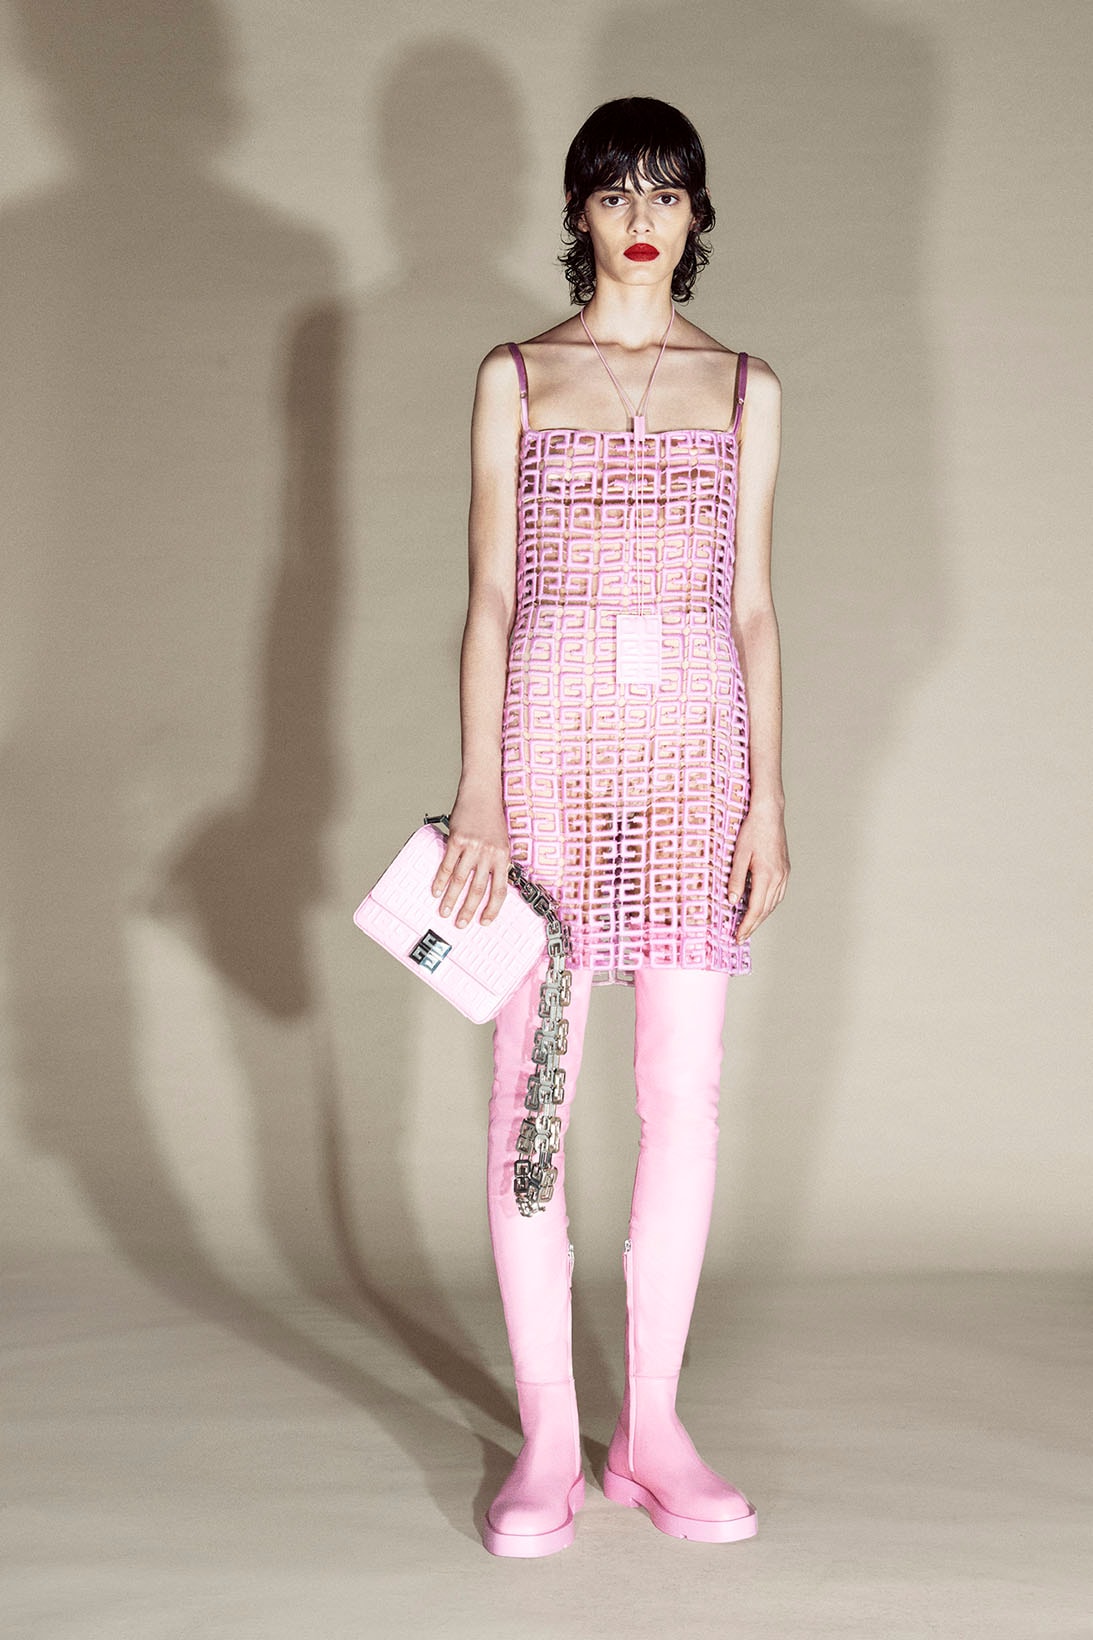 givenchy matthew williams pre-fall 2021 collection clogs marshmallow slides studs suits dresses